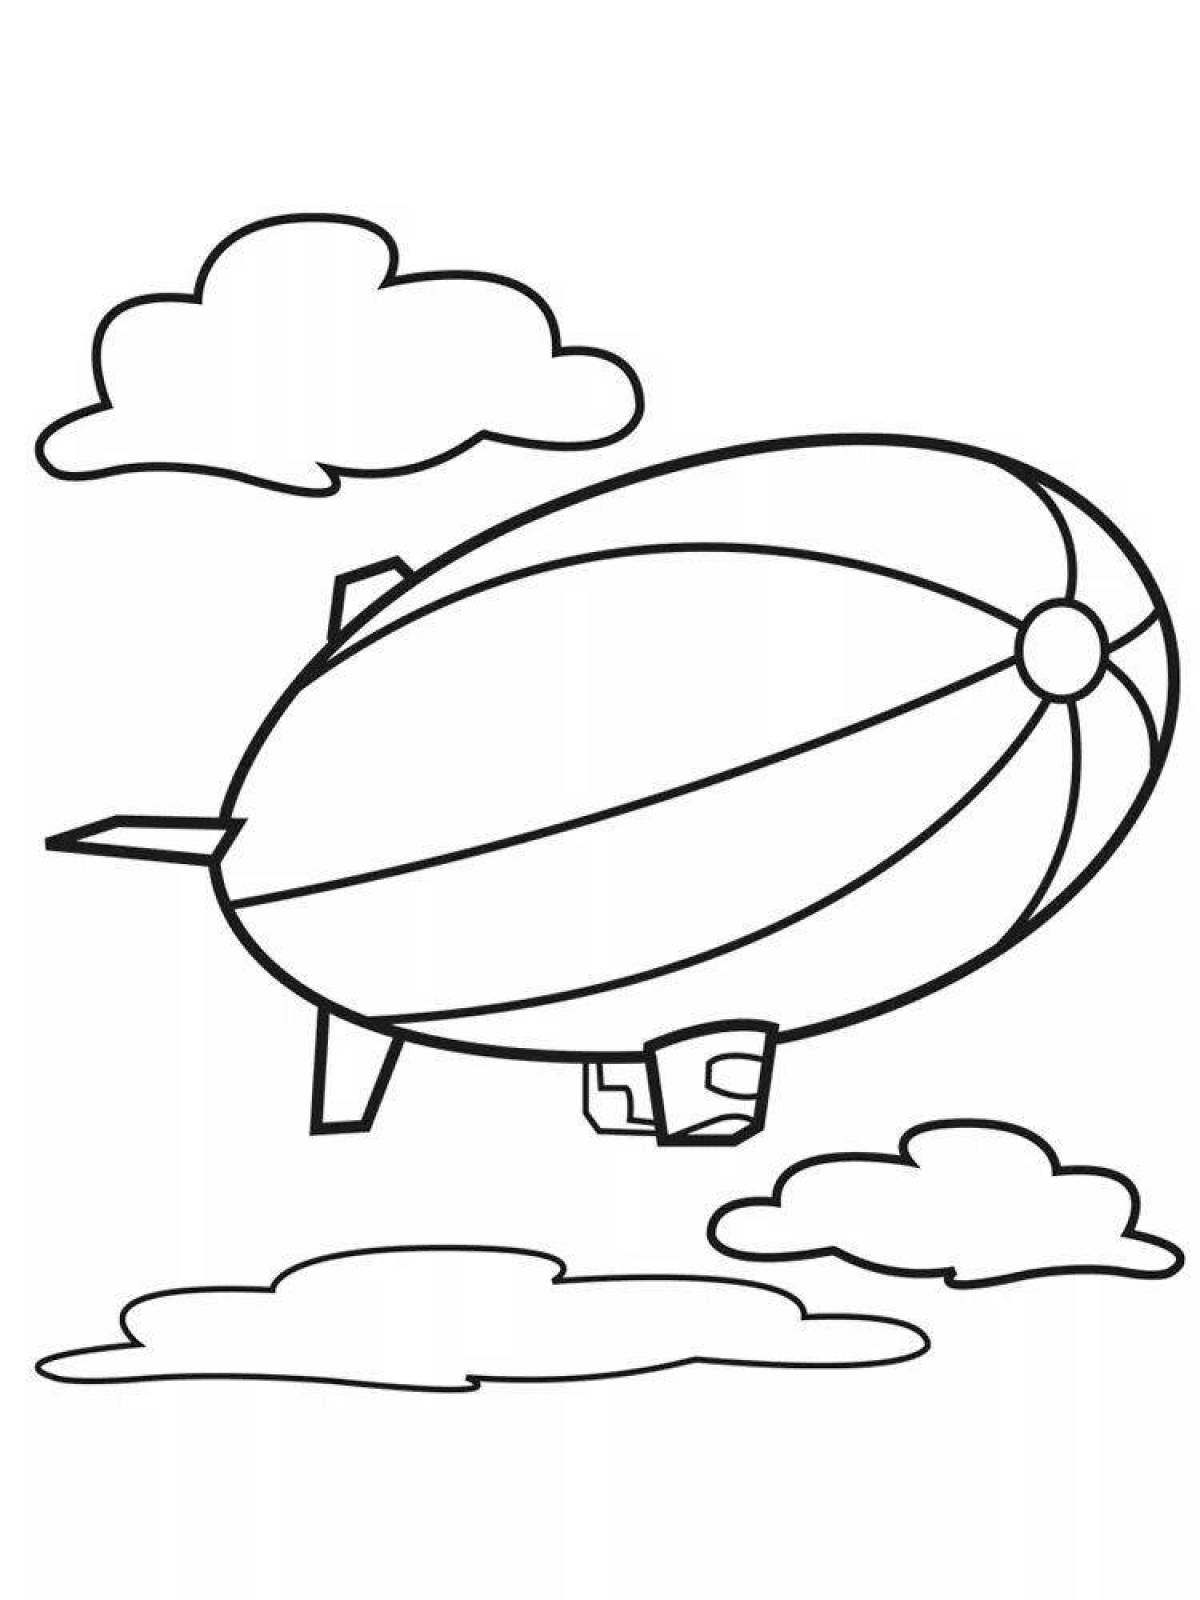 Glitter aircraft coloring pages